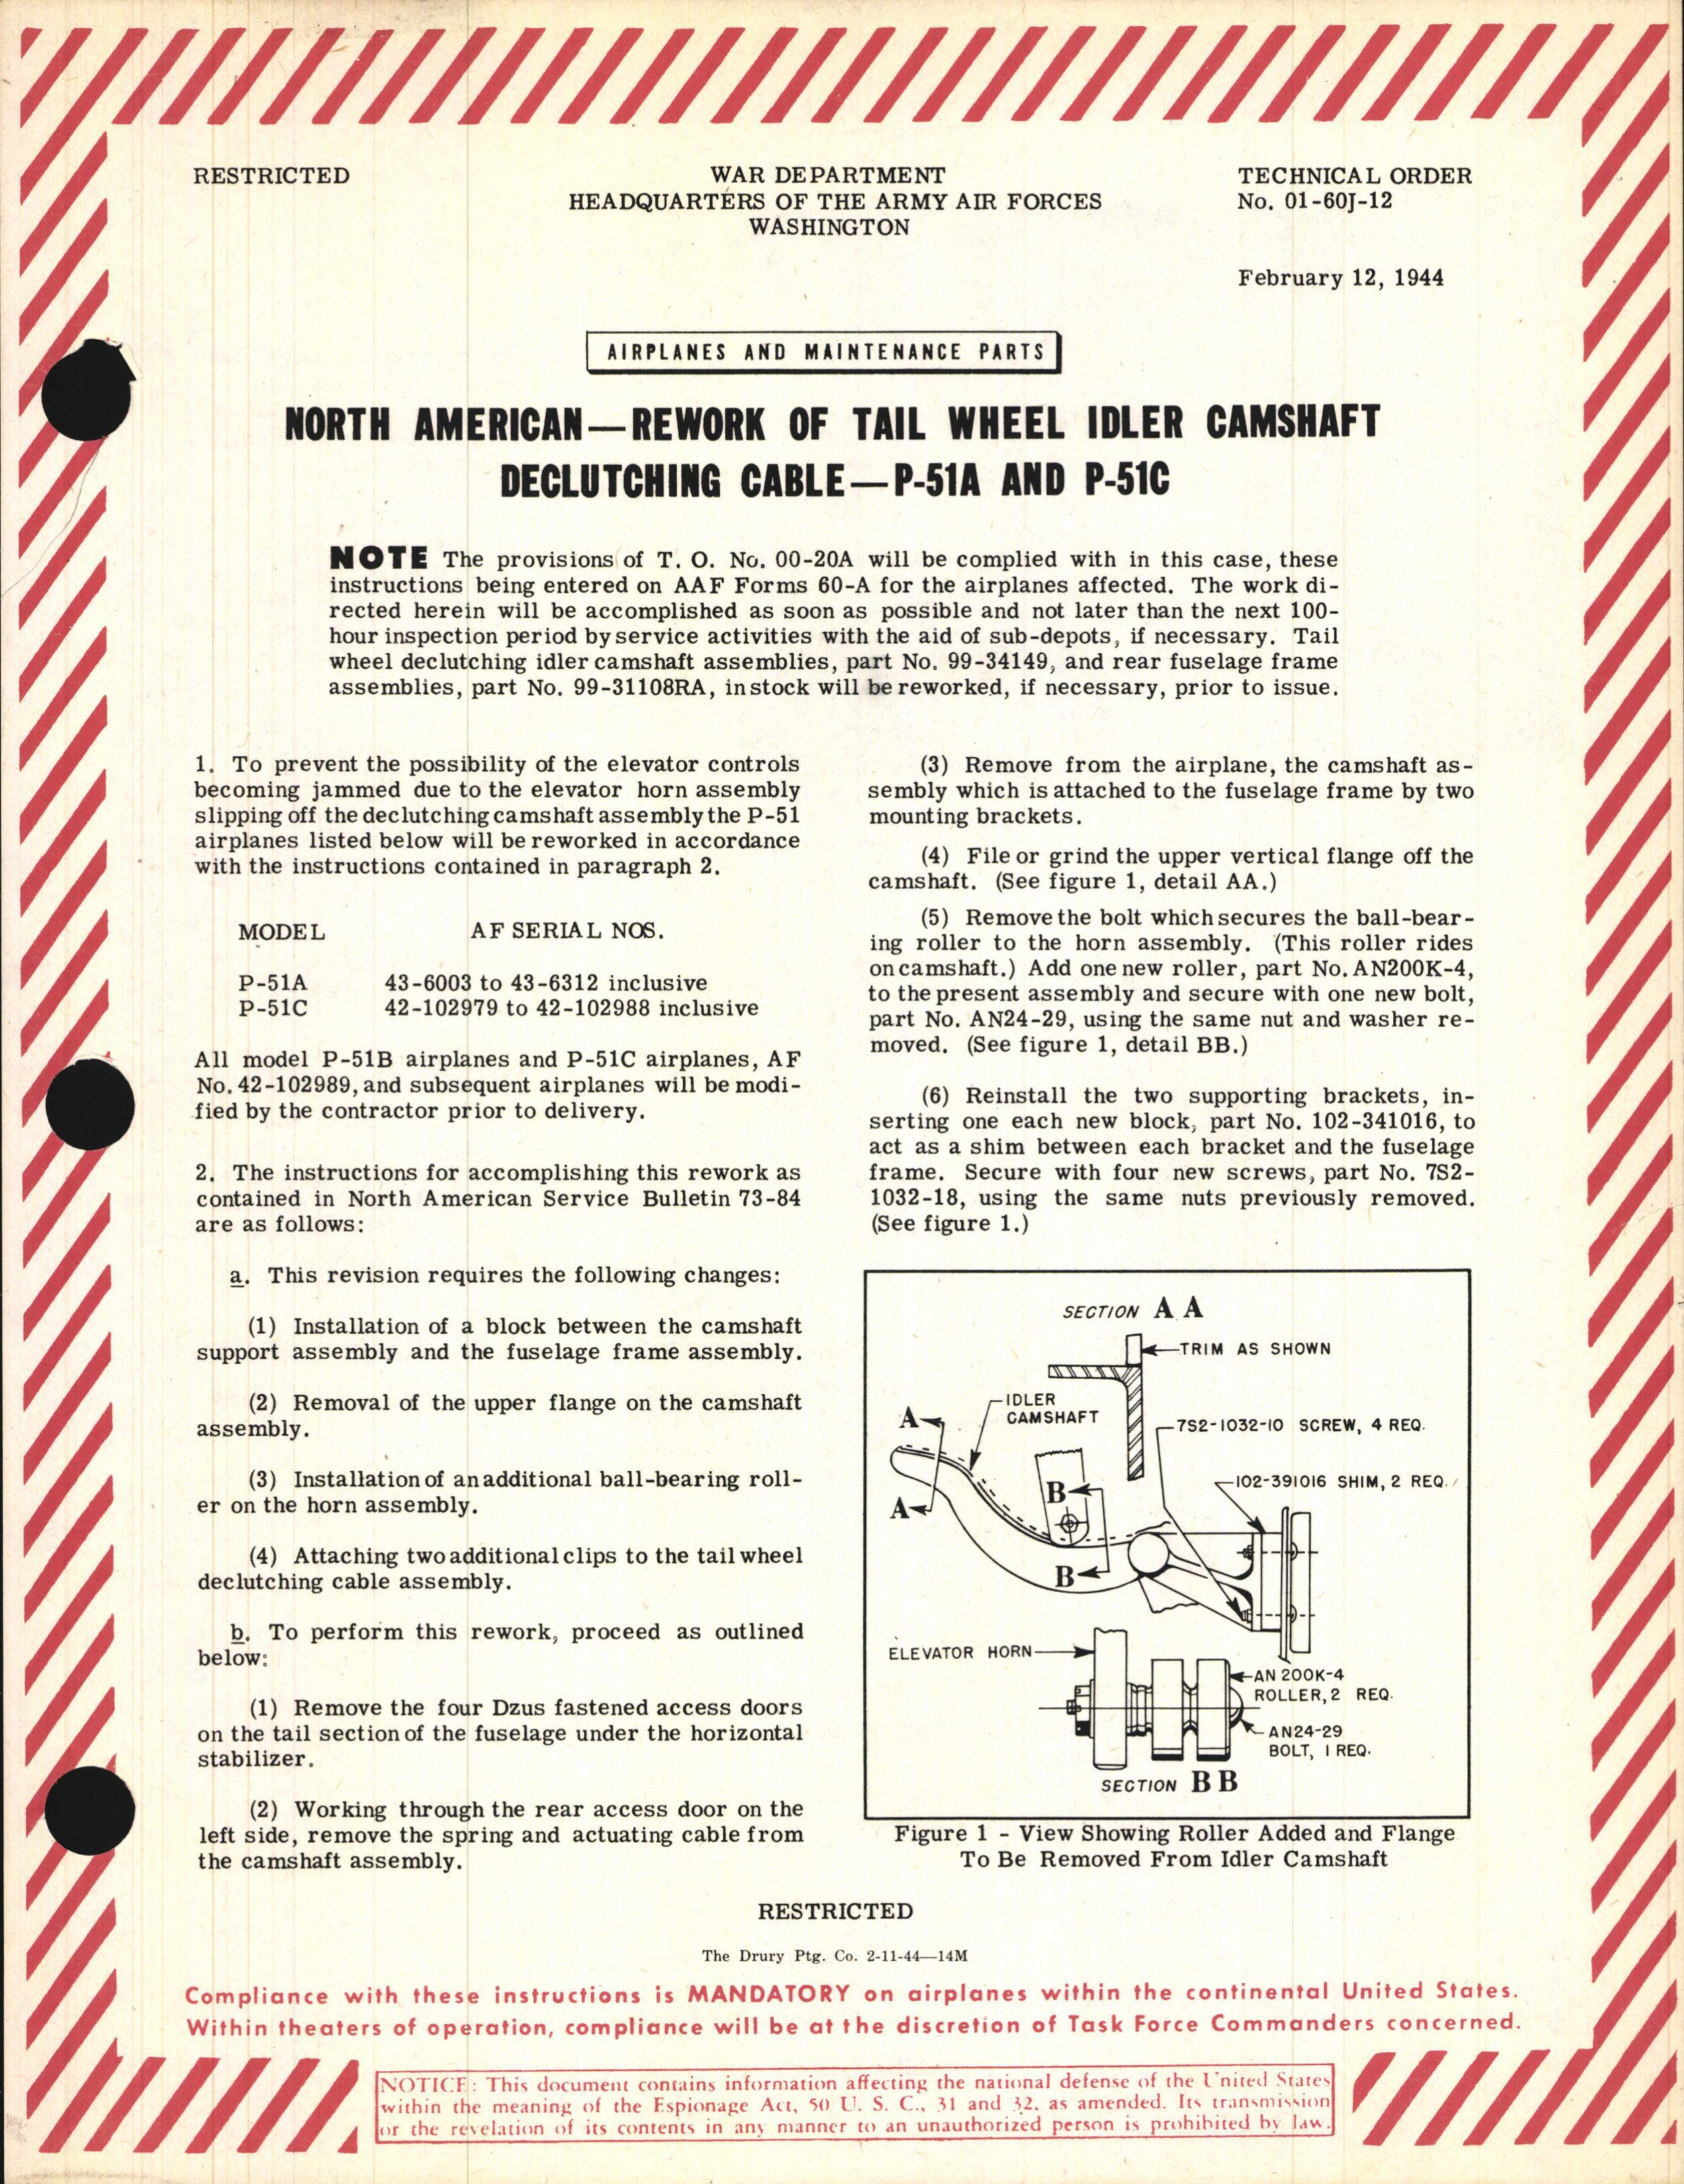 Sample page 1 from AirCorps Library document: Rework of Tail Wheel Idler Camshaft Declutching Cable for P-51A and P-51C